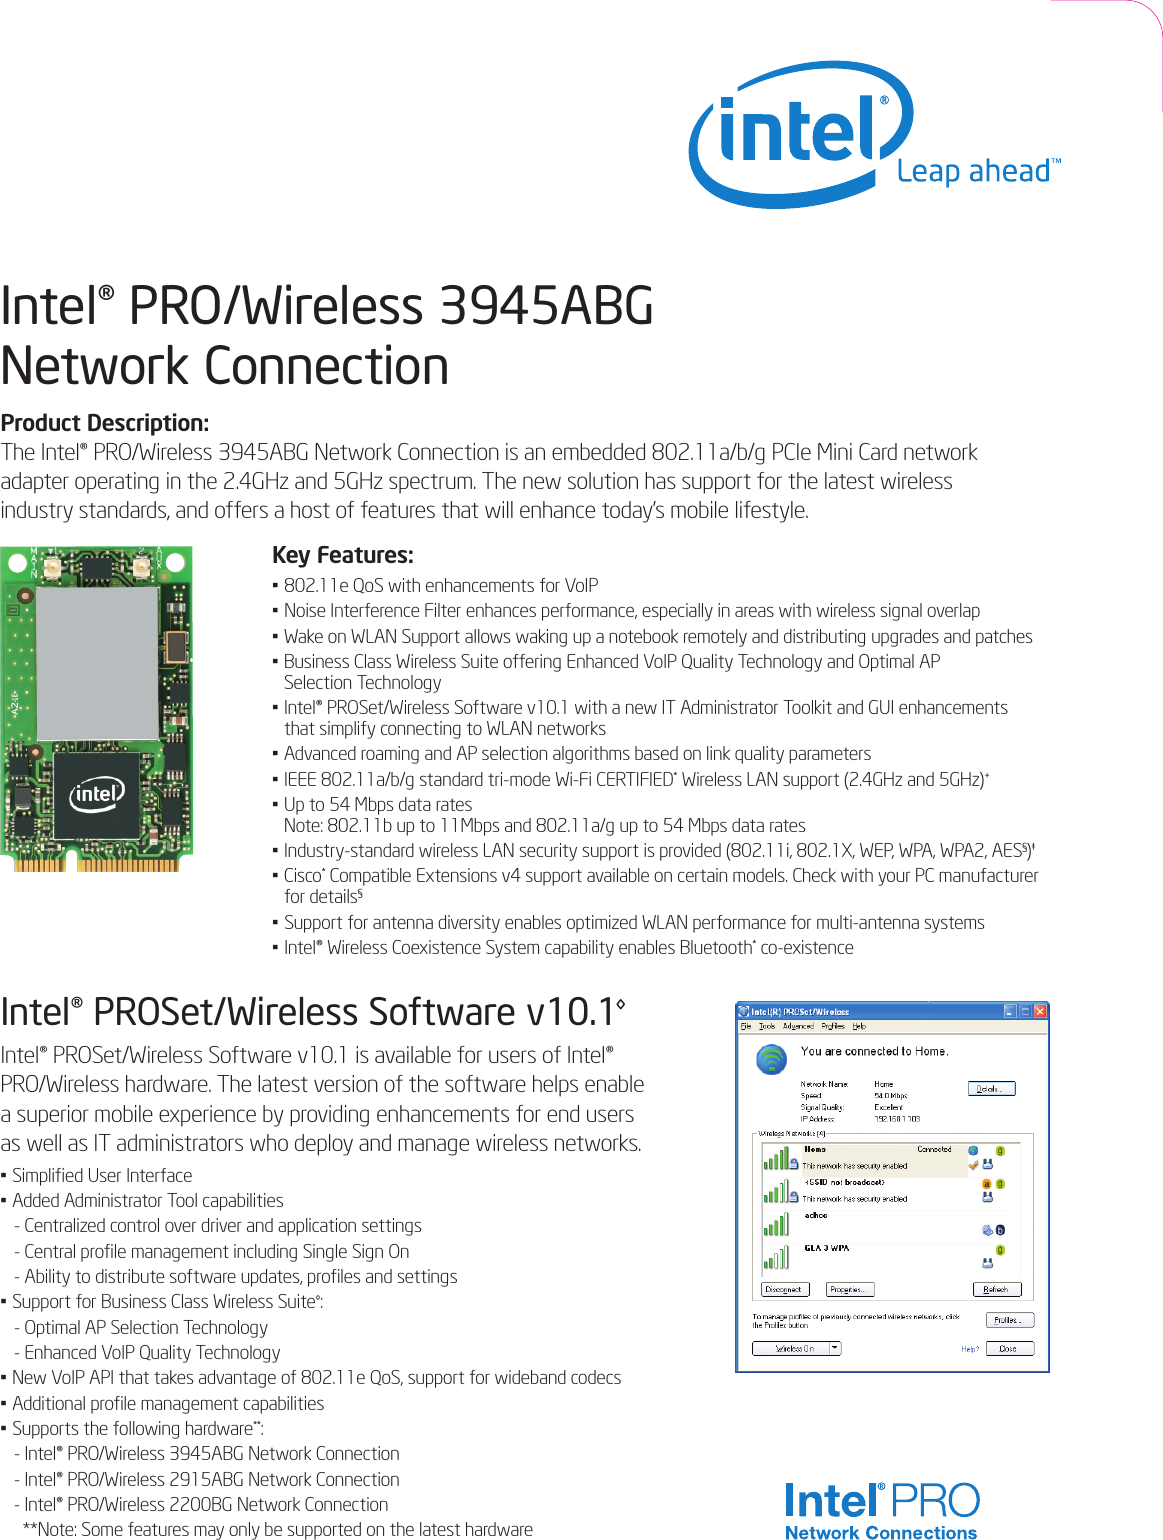 Intel® PRO/Wireless 3945ABG Network ConnectionProduct Description:The Intel® PRO/Wireless 3945ABG Network Connection is an embedded 802.11a/b/g PCIe Mini Card networkadapter operating in the 2.4GHz and 5GHz spectrum. The new solution has support for the latest wireless industry standards, and offers a host of features that will enhance today’s mobile lifestyle.Key Features:•802.11e QoS with enhancements for VoIP• Noise Interference Filter enhances performance, especially in areas with wireless signal overlap • Wake on WLAN Support allows waking up a notebook remotely and distributing upgrades and patches• Business Class Wireless Suite offering Enhanced VoIP Quality Technology and Optimal APSelection Technology• Intel® PROSet/Wireless Software v10.1 with a new IT Administrator Toolkit and GUI enhancements that simplify connecting to WLAN networks• Advanced roaming and AP selection algorithms based on link quality parameters• IEEE 802.11a/b/g standard tri-mode Wi-Fi CERTIFIED*Wireless LAN support (2.4GHz and 5GHz)+•Up to 54 Mbps data rates Note: 802.11b up to 11Mbps and 802.11a/g up to 54 Mbps data rates•Industry-standard wireless LAN security support is provided (802.11i, 802.1X, WEP, WPA, WPA2, AES§)‡• Cisco*Compatible Extensions v4 support available on certain models. Check with your PC manufacturerfor details§•Support for antenna diversity enables optimized WLAN performance for multi-antenna systems• Intel® Wireless Coexistence System capability enables Bluetooth*co-existence Intel® PROSet/Wireless Software v10.1◊Intel® PROSet/Wireless Software v10.1 is available for users of Intel®PRO/Wireless hardware. The latest version of the software helps enable a superior mobile experience by providing enhancements for end users as well as IT administrators who deploy and manage wireless networks.•Simplified User Interface•Added Administrator Tool capabilities-Centralized control over driver and application settings- Central profile management including Single Sign On - Ability to distribute software updates, profiles and settings• Support for Business Class Wireless Suite◊:-Optimal AP Selection Technology- Enhanced VoIP Quality Technology•New VoIP API that takes advantage of 802.11e QoS, support for wideband codecs• Additional profile managementcapabilities•Supports the following hardware**:- Intel® PRO/Wireless 3945ABG Network Connection- Intel® PRO/Wireless 2915ABG Network Connection- Intel® PRO/Wireless 2200BG Network Connection**Note: Some features may only be supported on the latest hardware